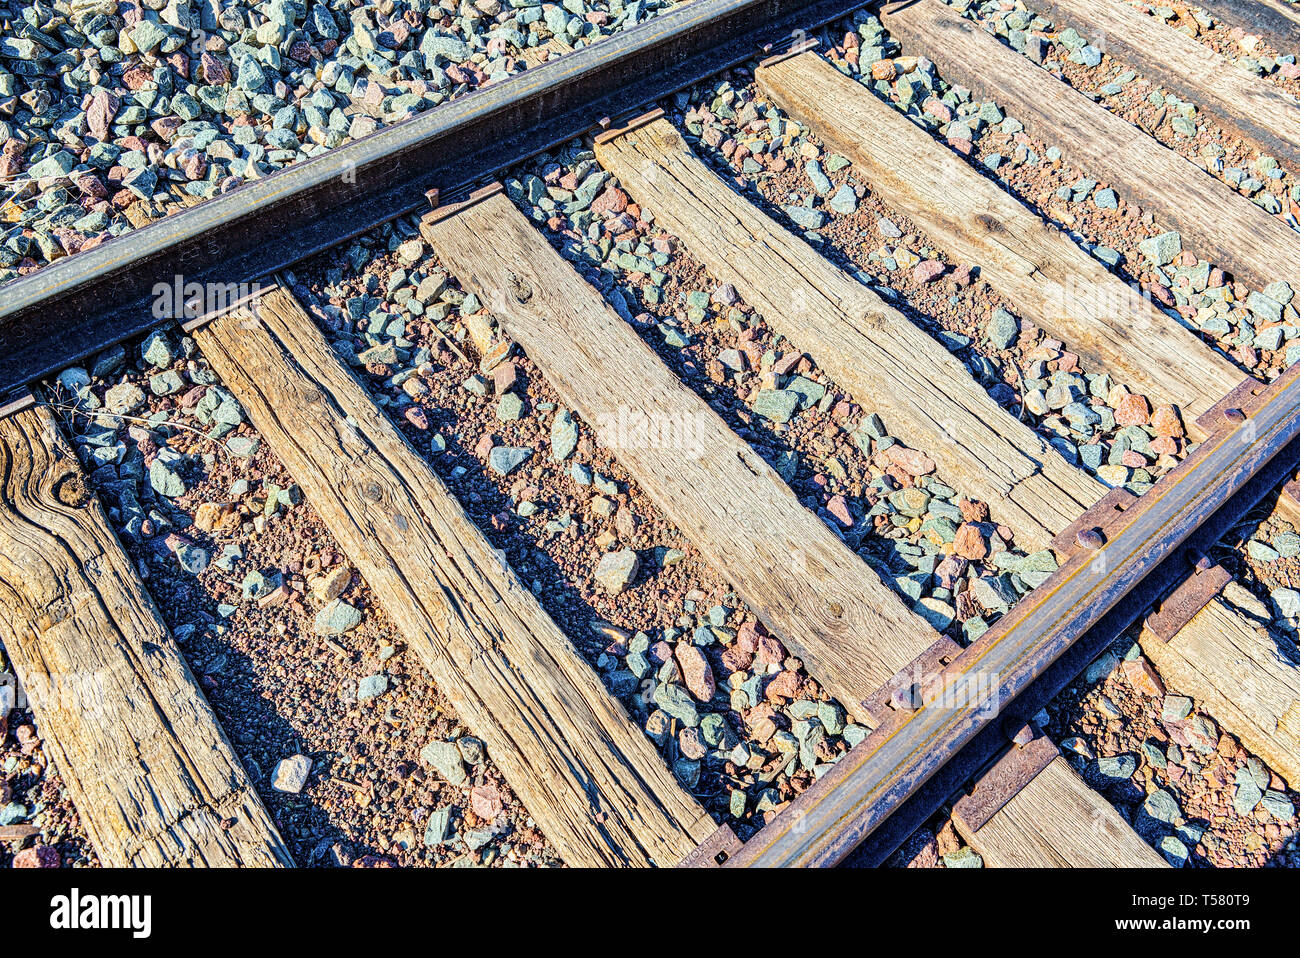 Old railway sleepers and rails in an American town. USA. Stock Photo